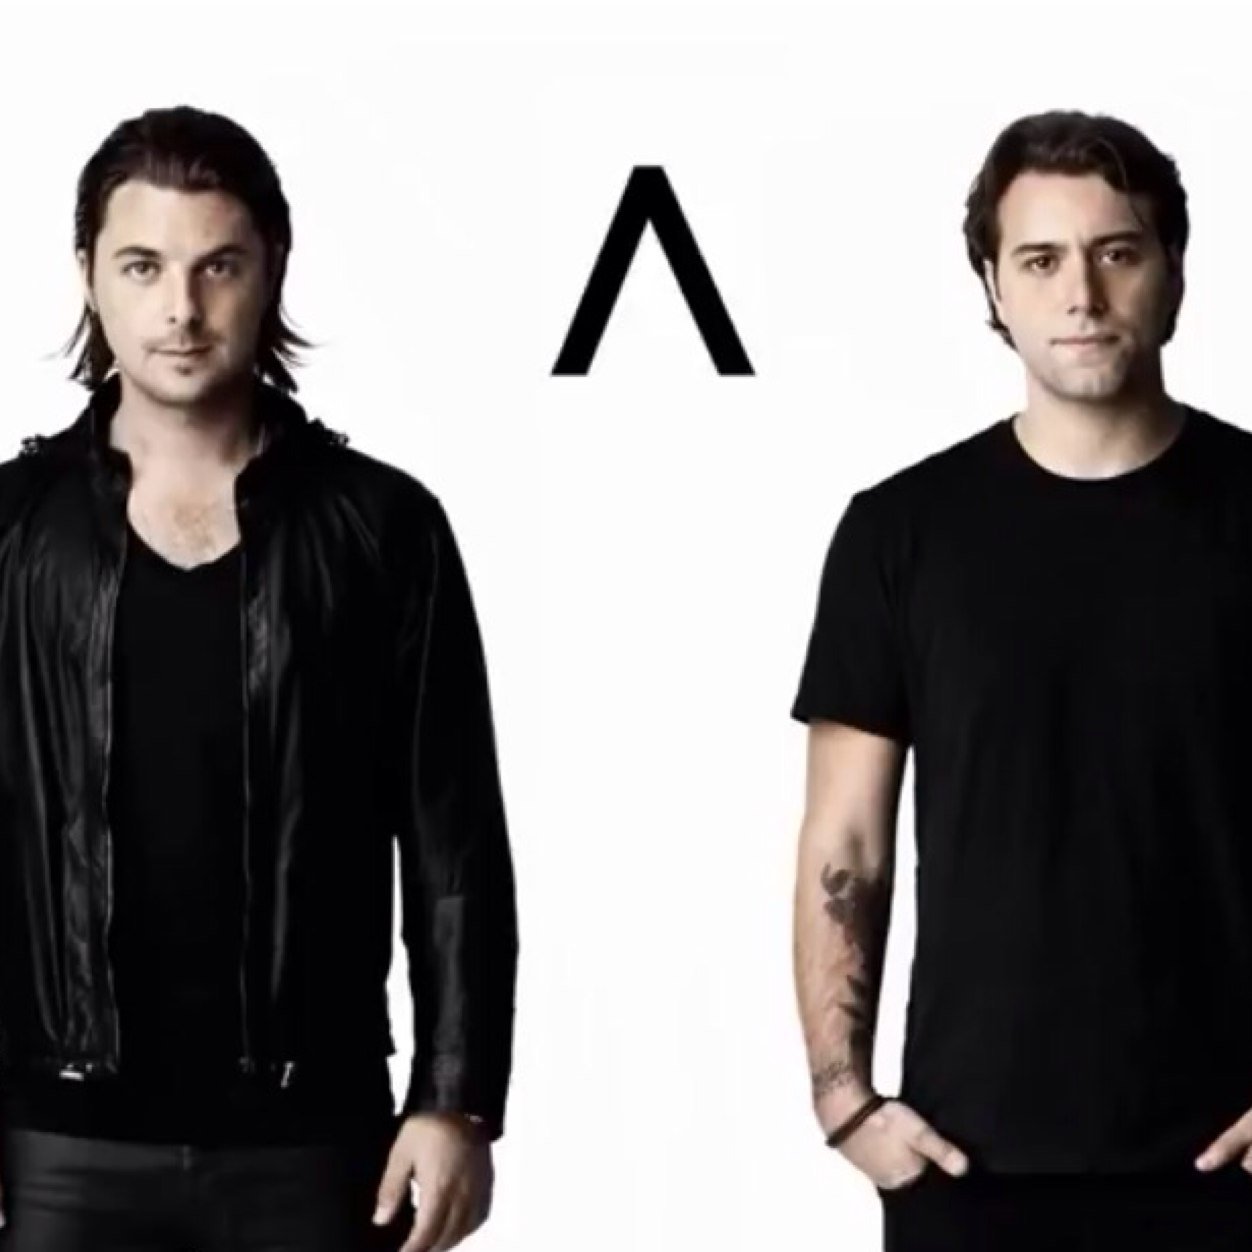 | Independent fanpage | we raved, we loved | 2/3 @swedishousemfia | @Axtone, @AXWELL & @INGROSSO notice often :) |